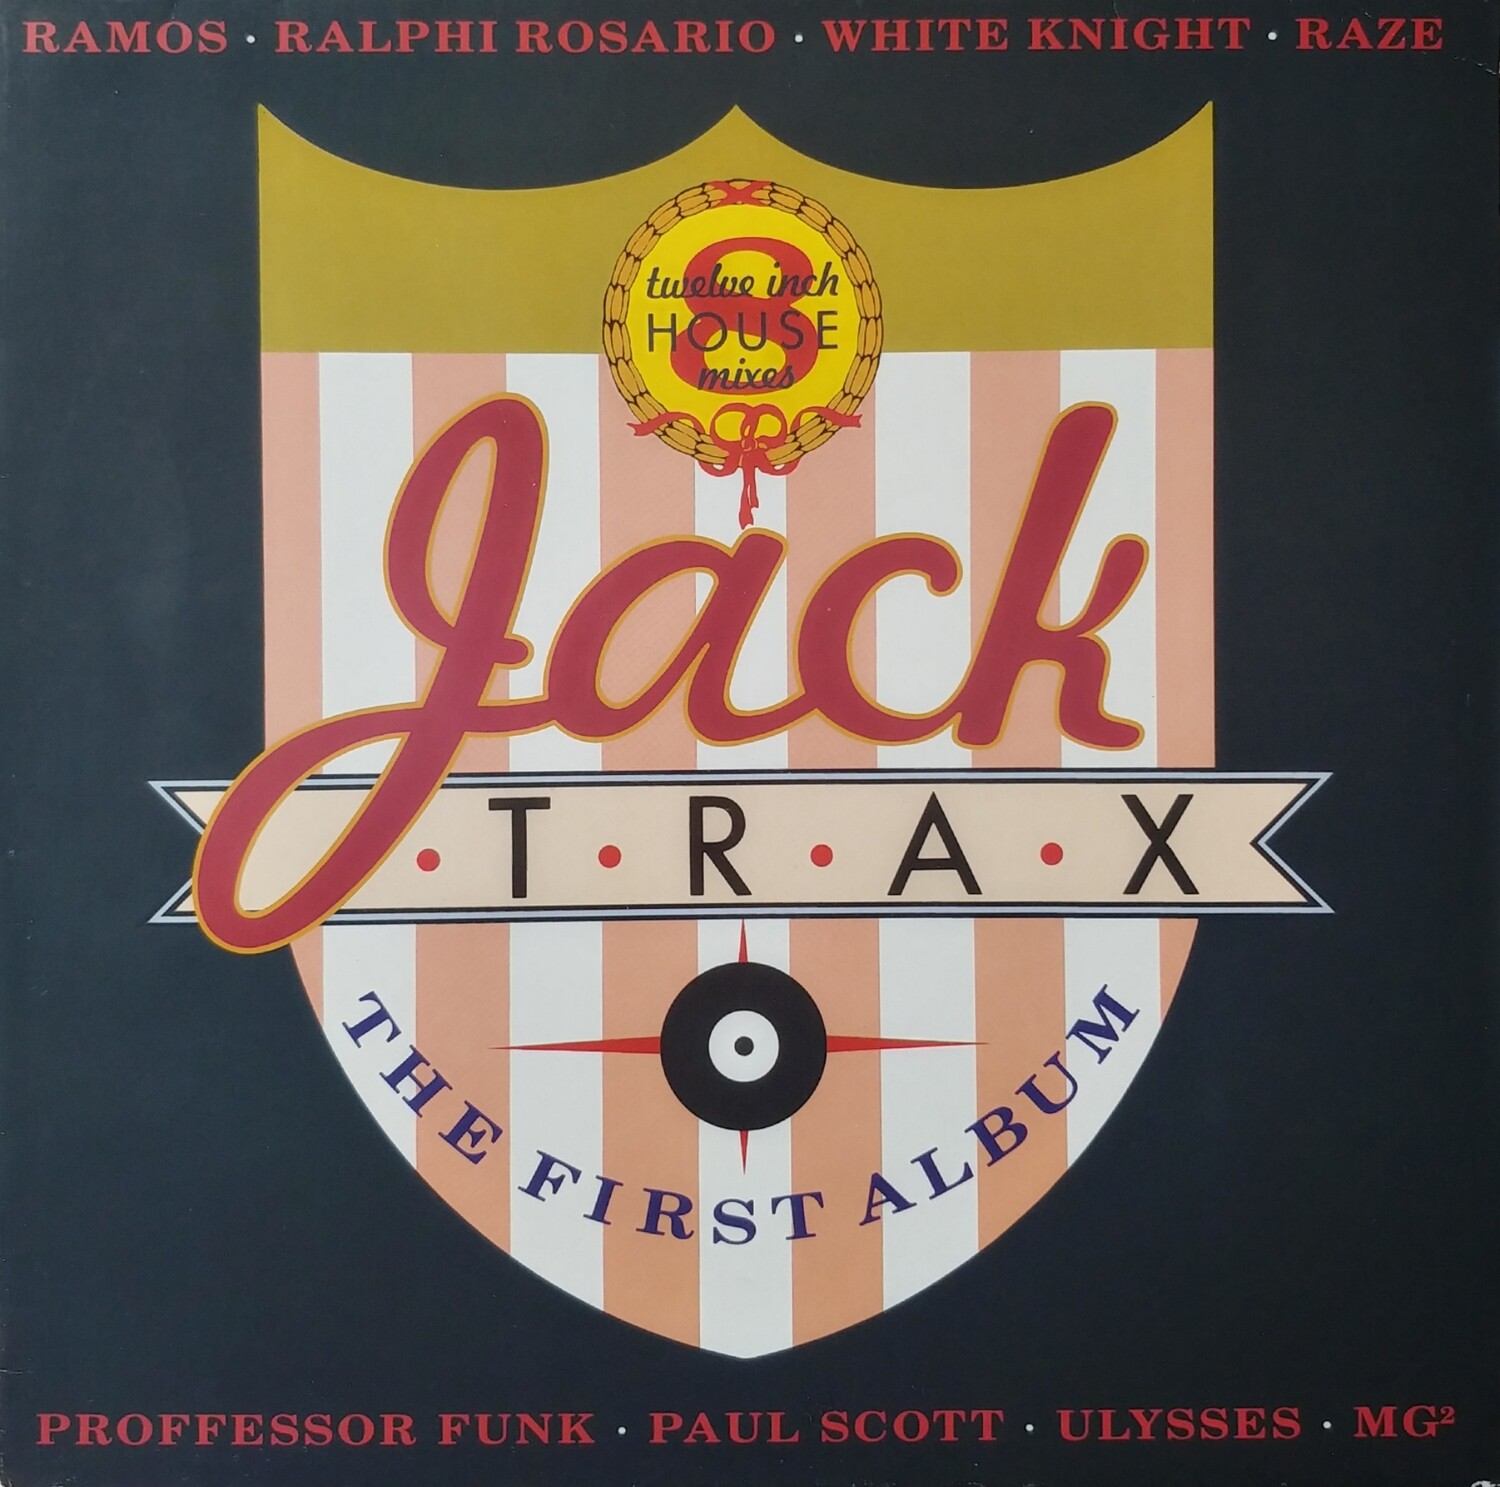 Jack Trax - The first album